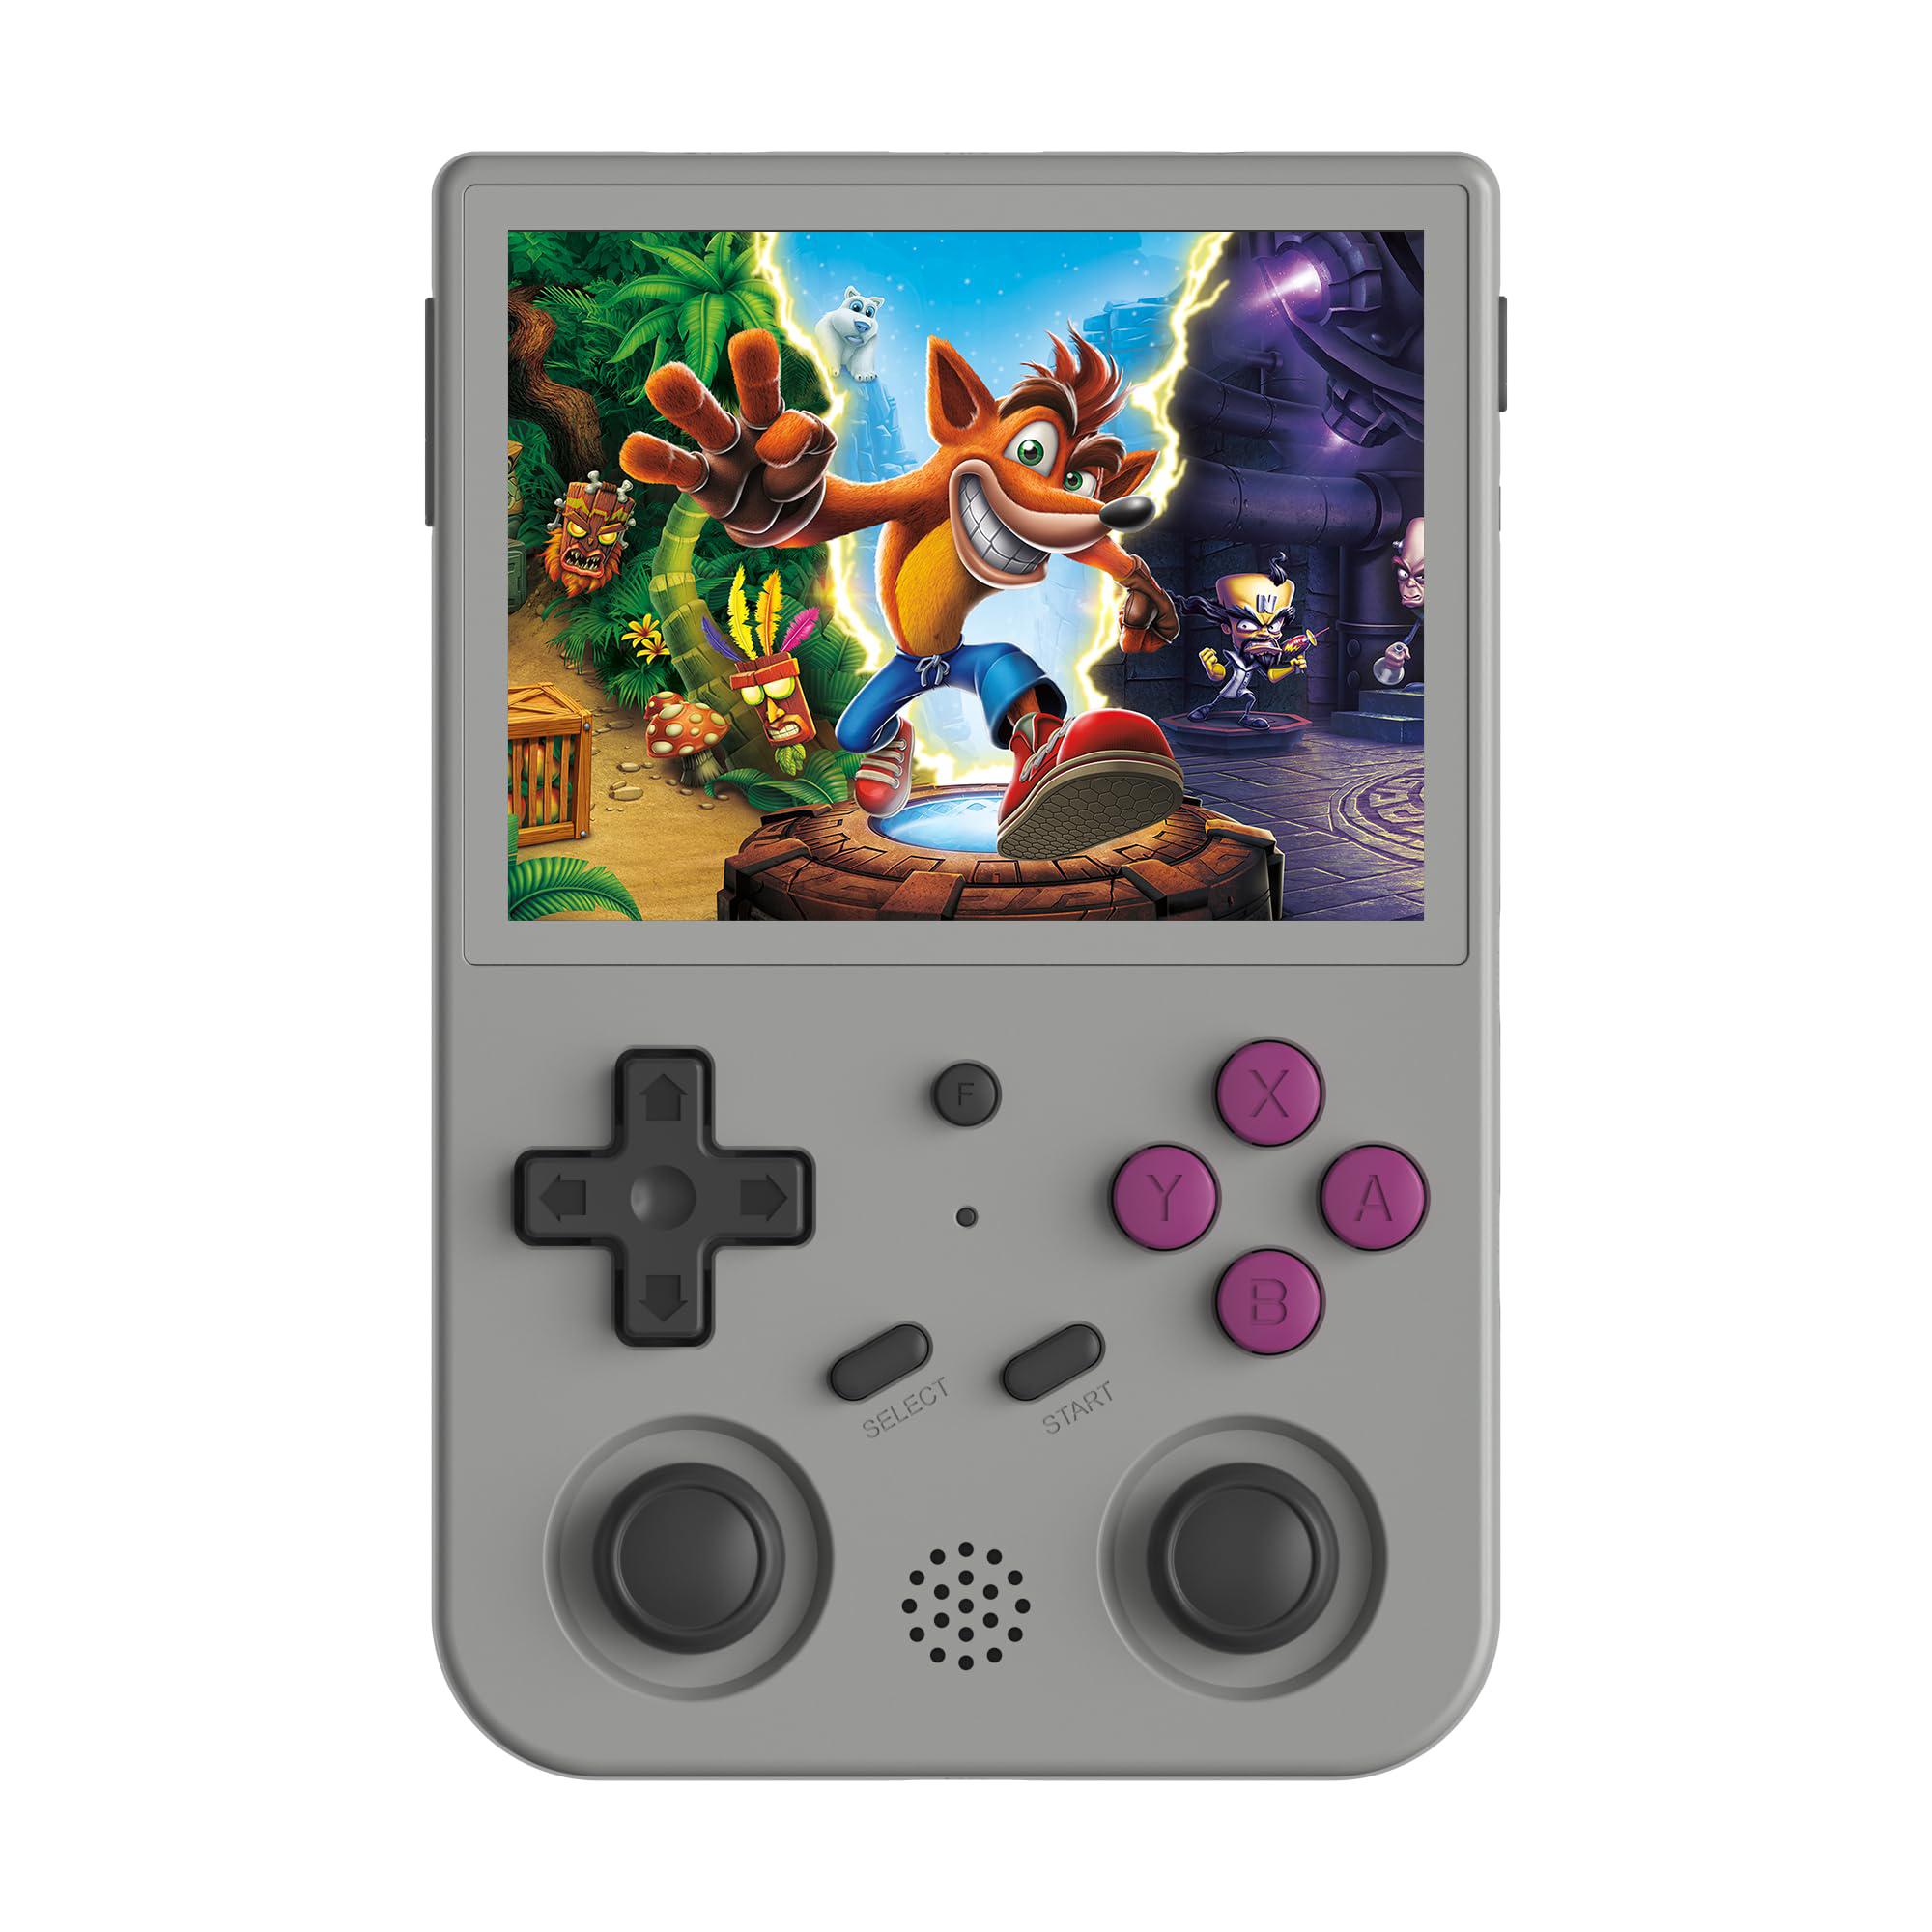 xp-lode rg353vs retro video handheld game console linux system, 3.5 inches ips screen 64g tf card preload 4450 classic games rk3566 6